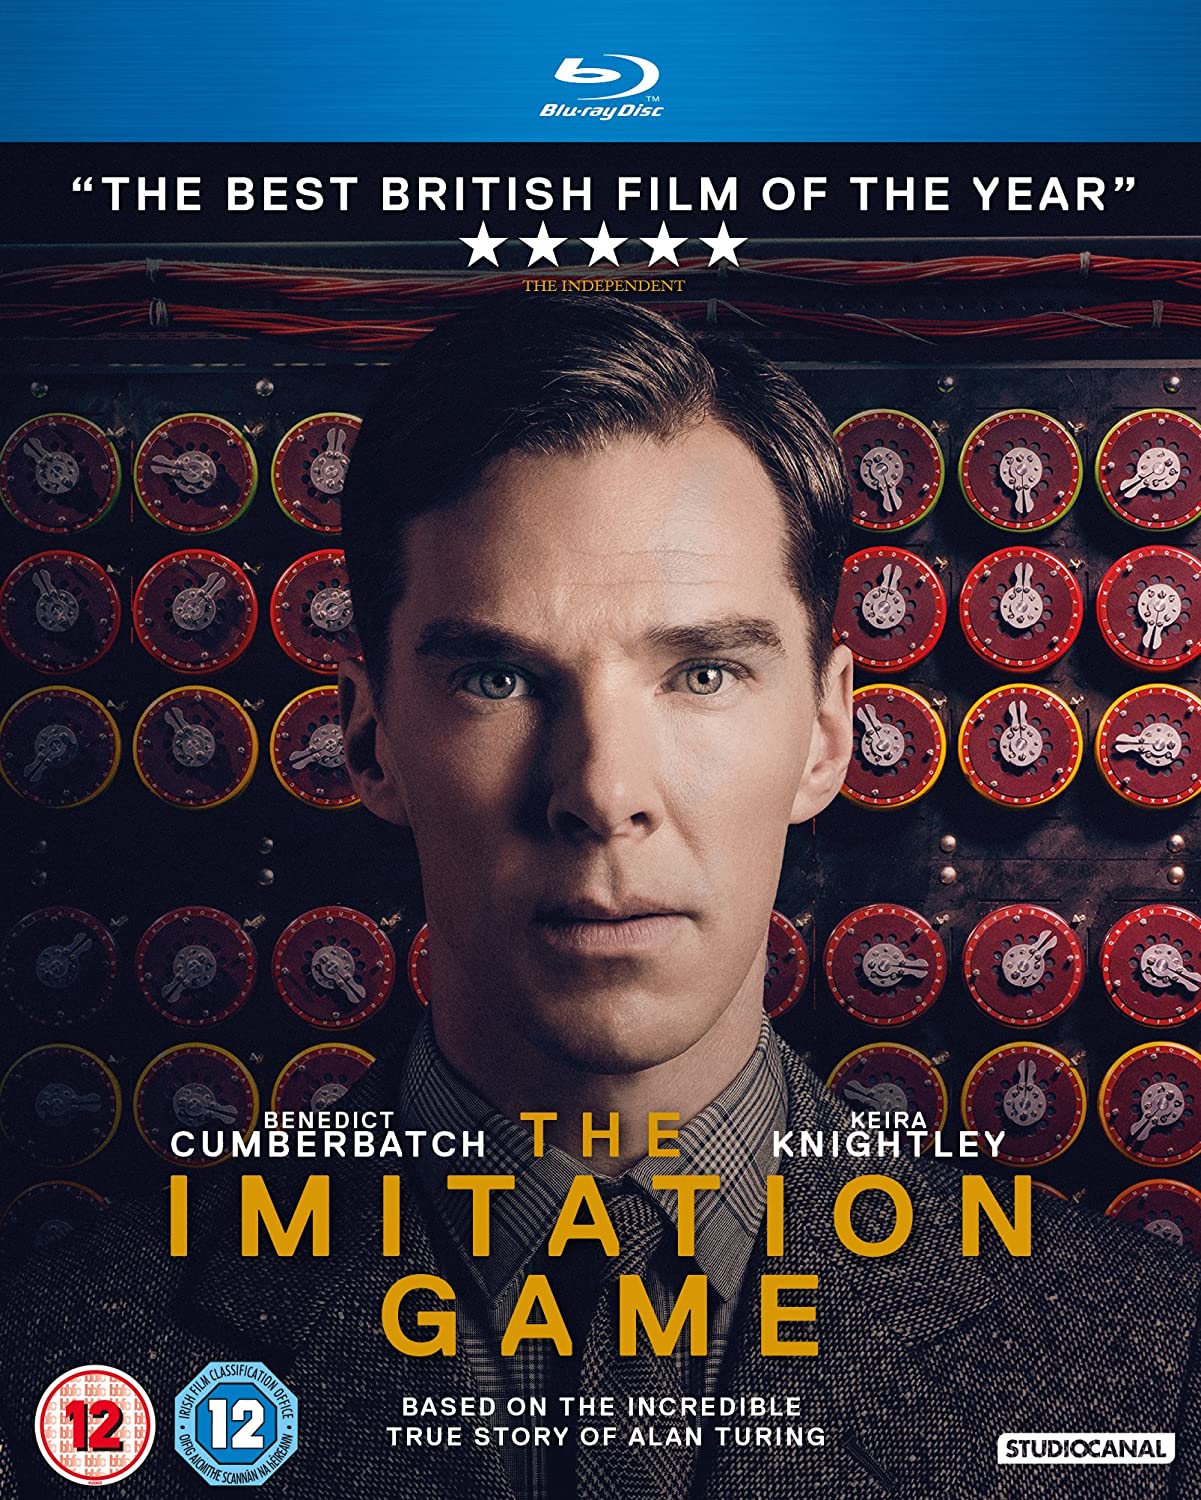 the imitation game test download free